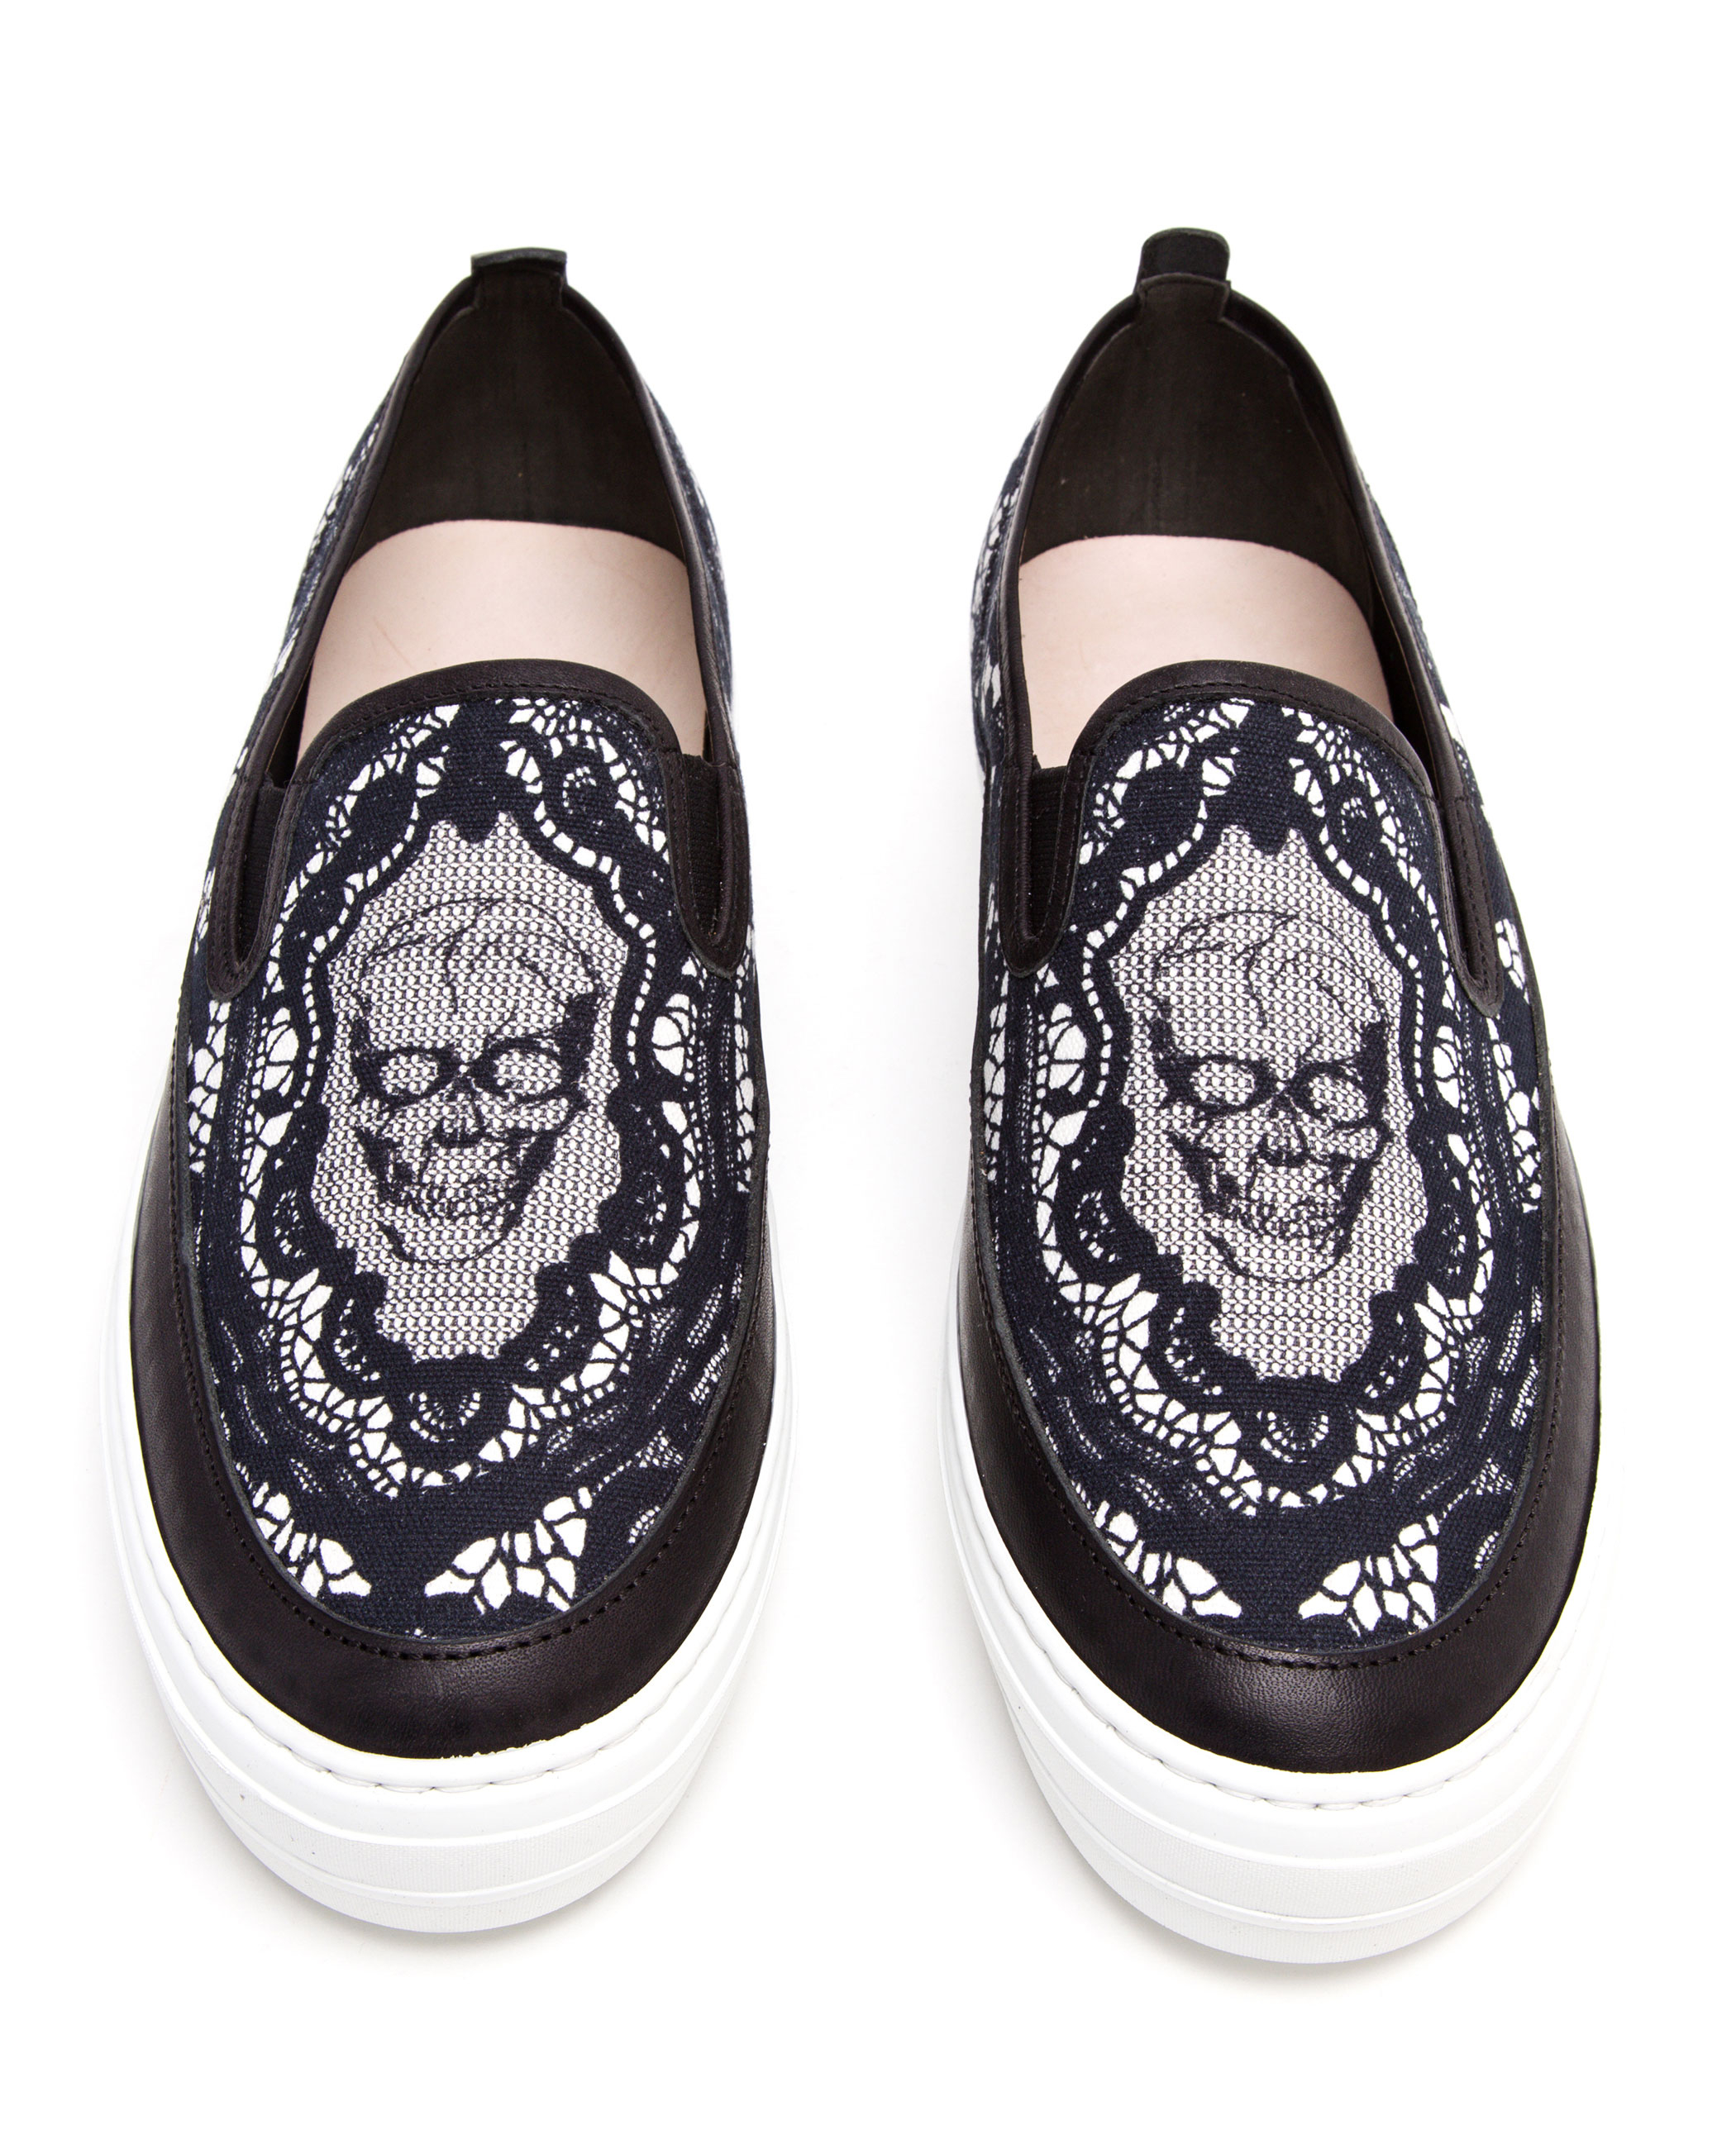 Alexander McQueen Lace Skull Printed Canvas Skate Shoes in Black for ...